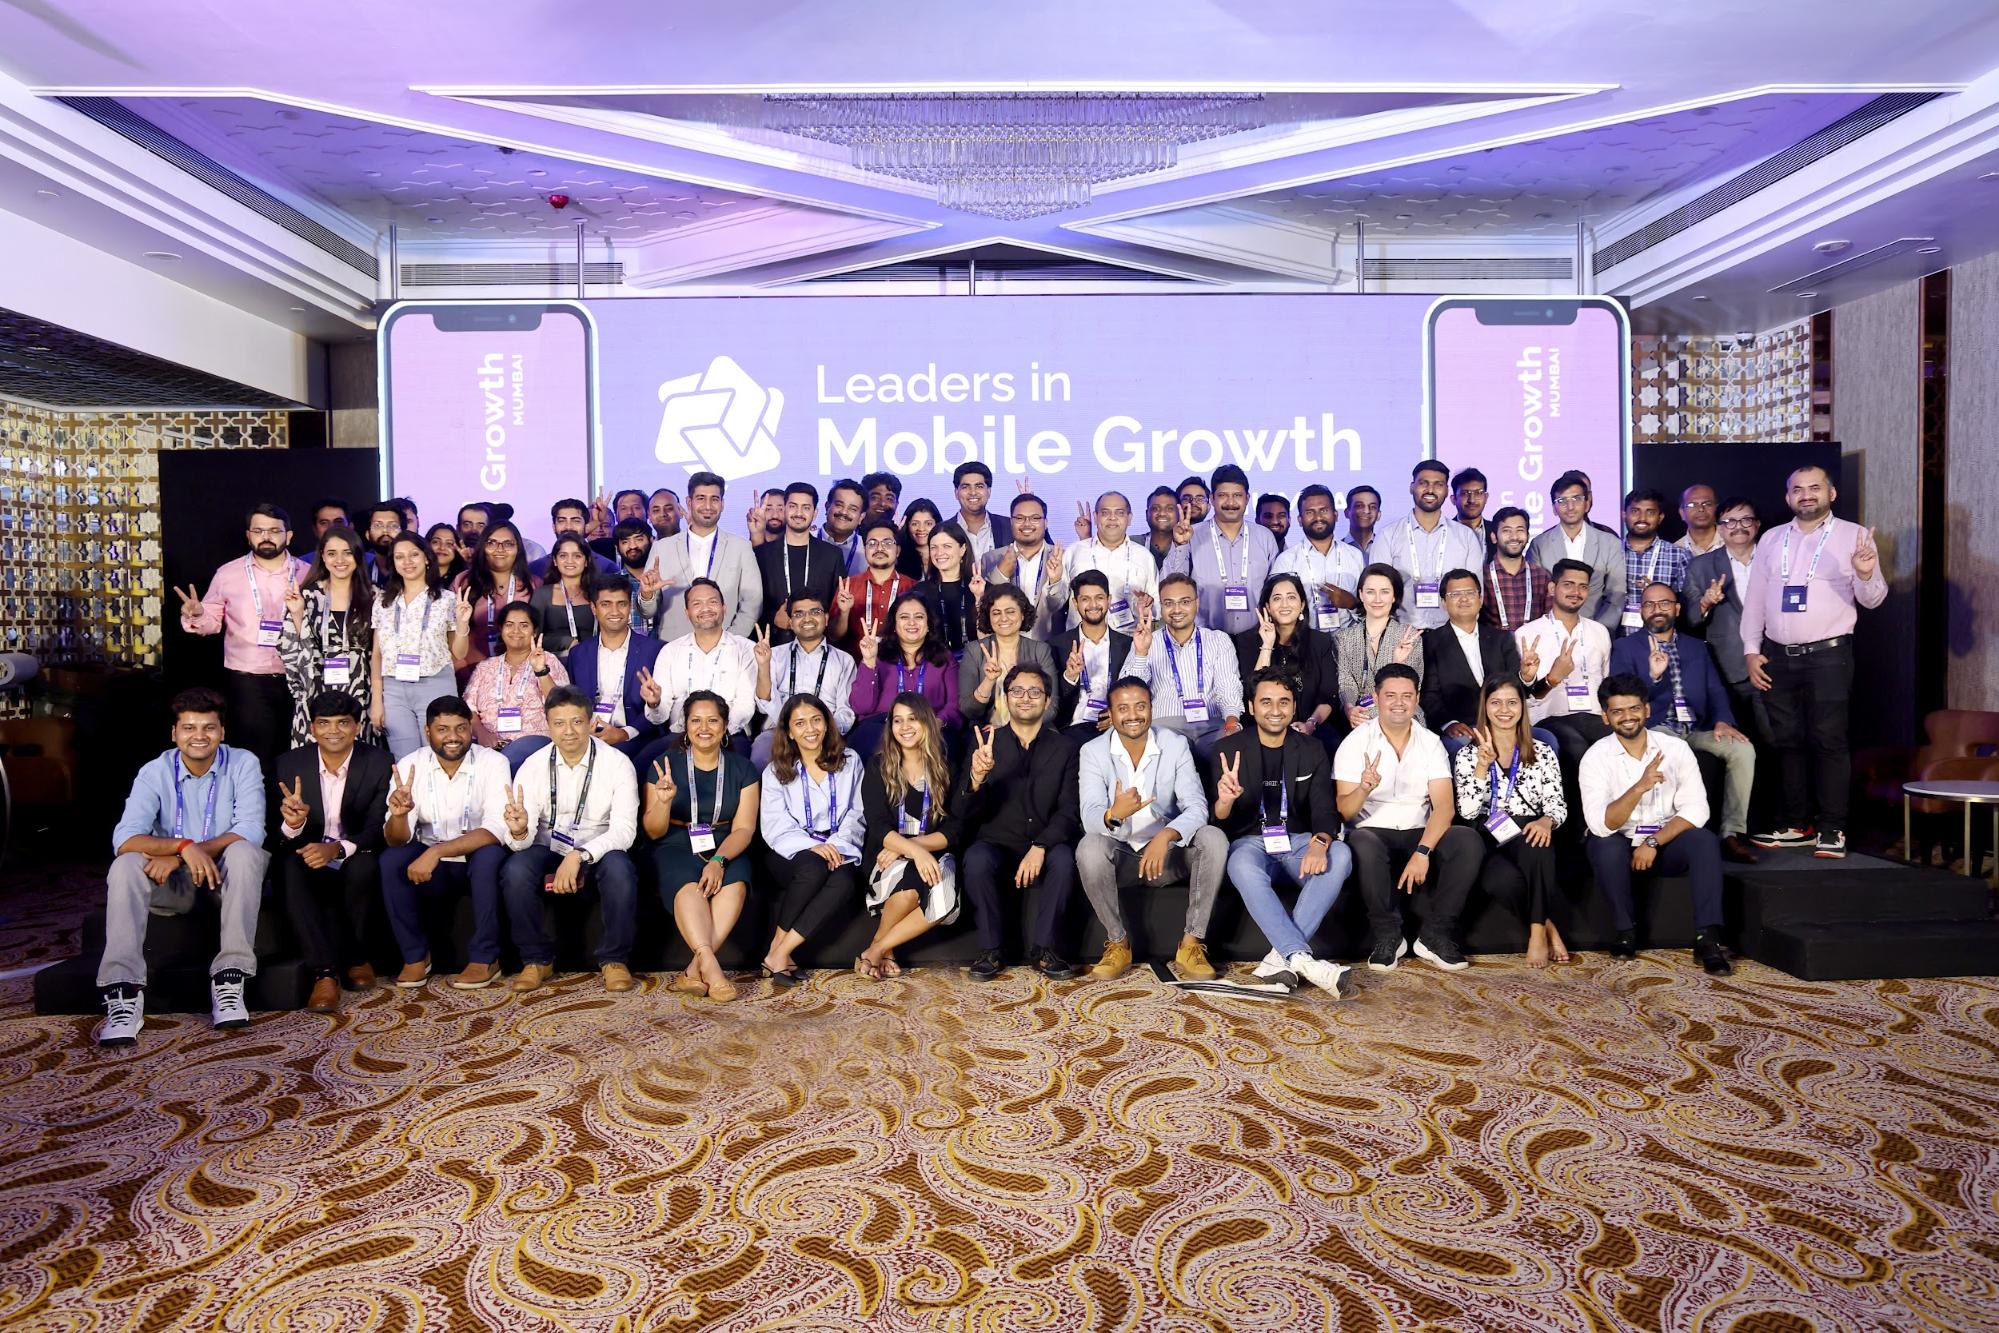 Attendees of Leaders in Mobile Growth Mumbai pose for a group photo.